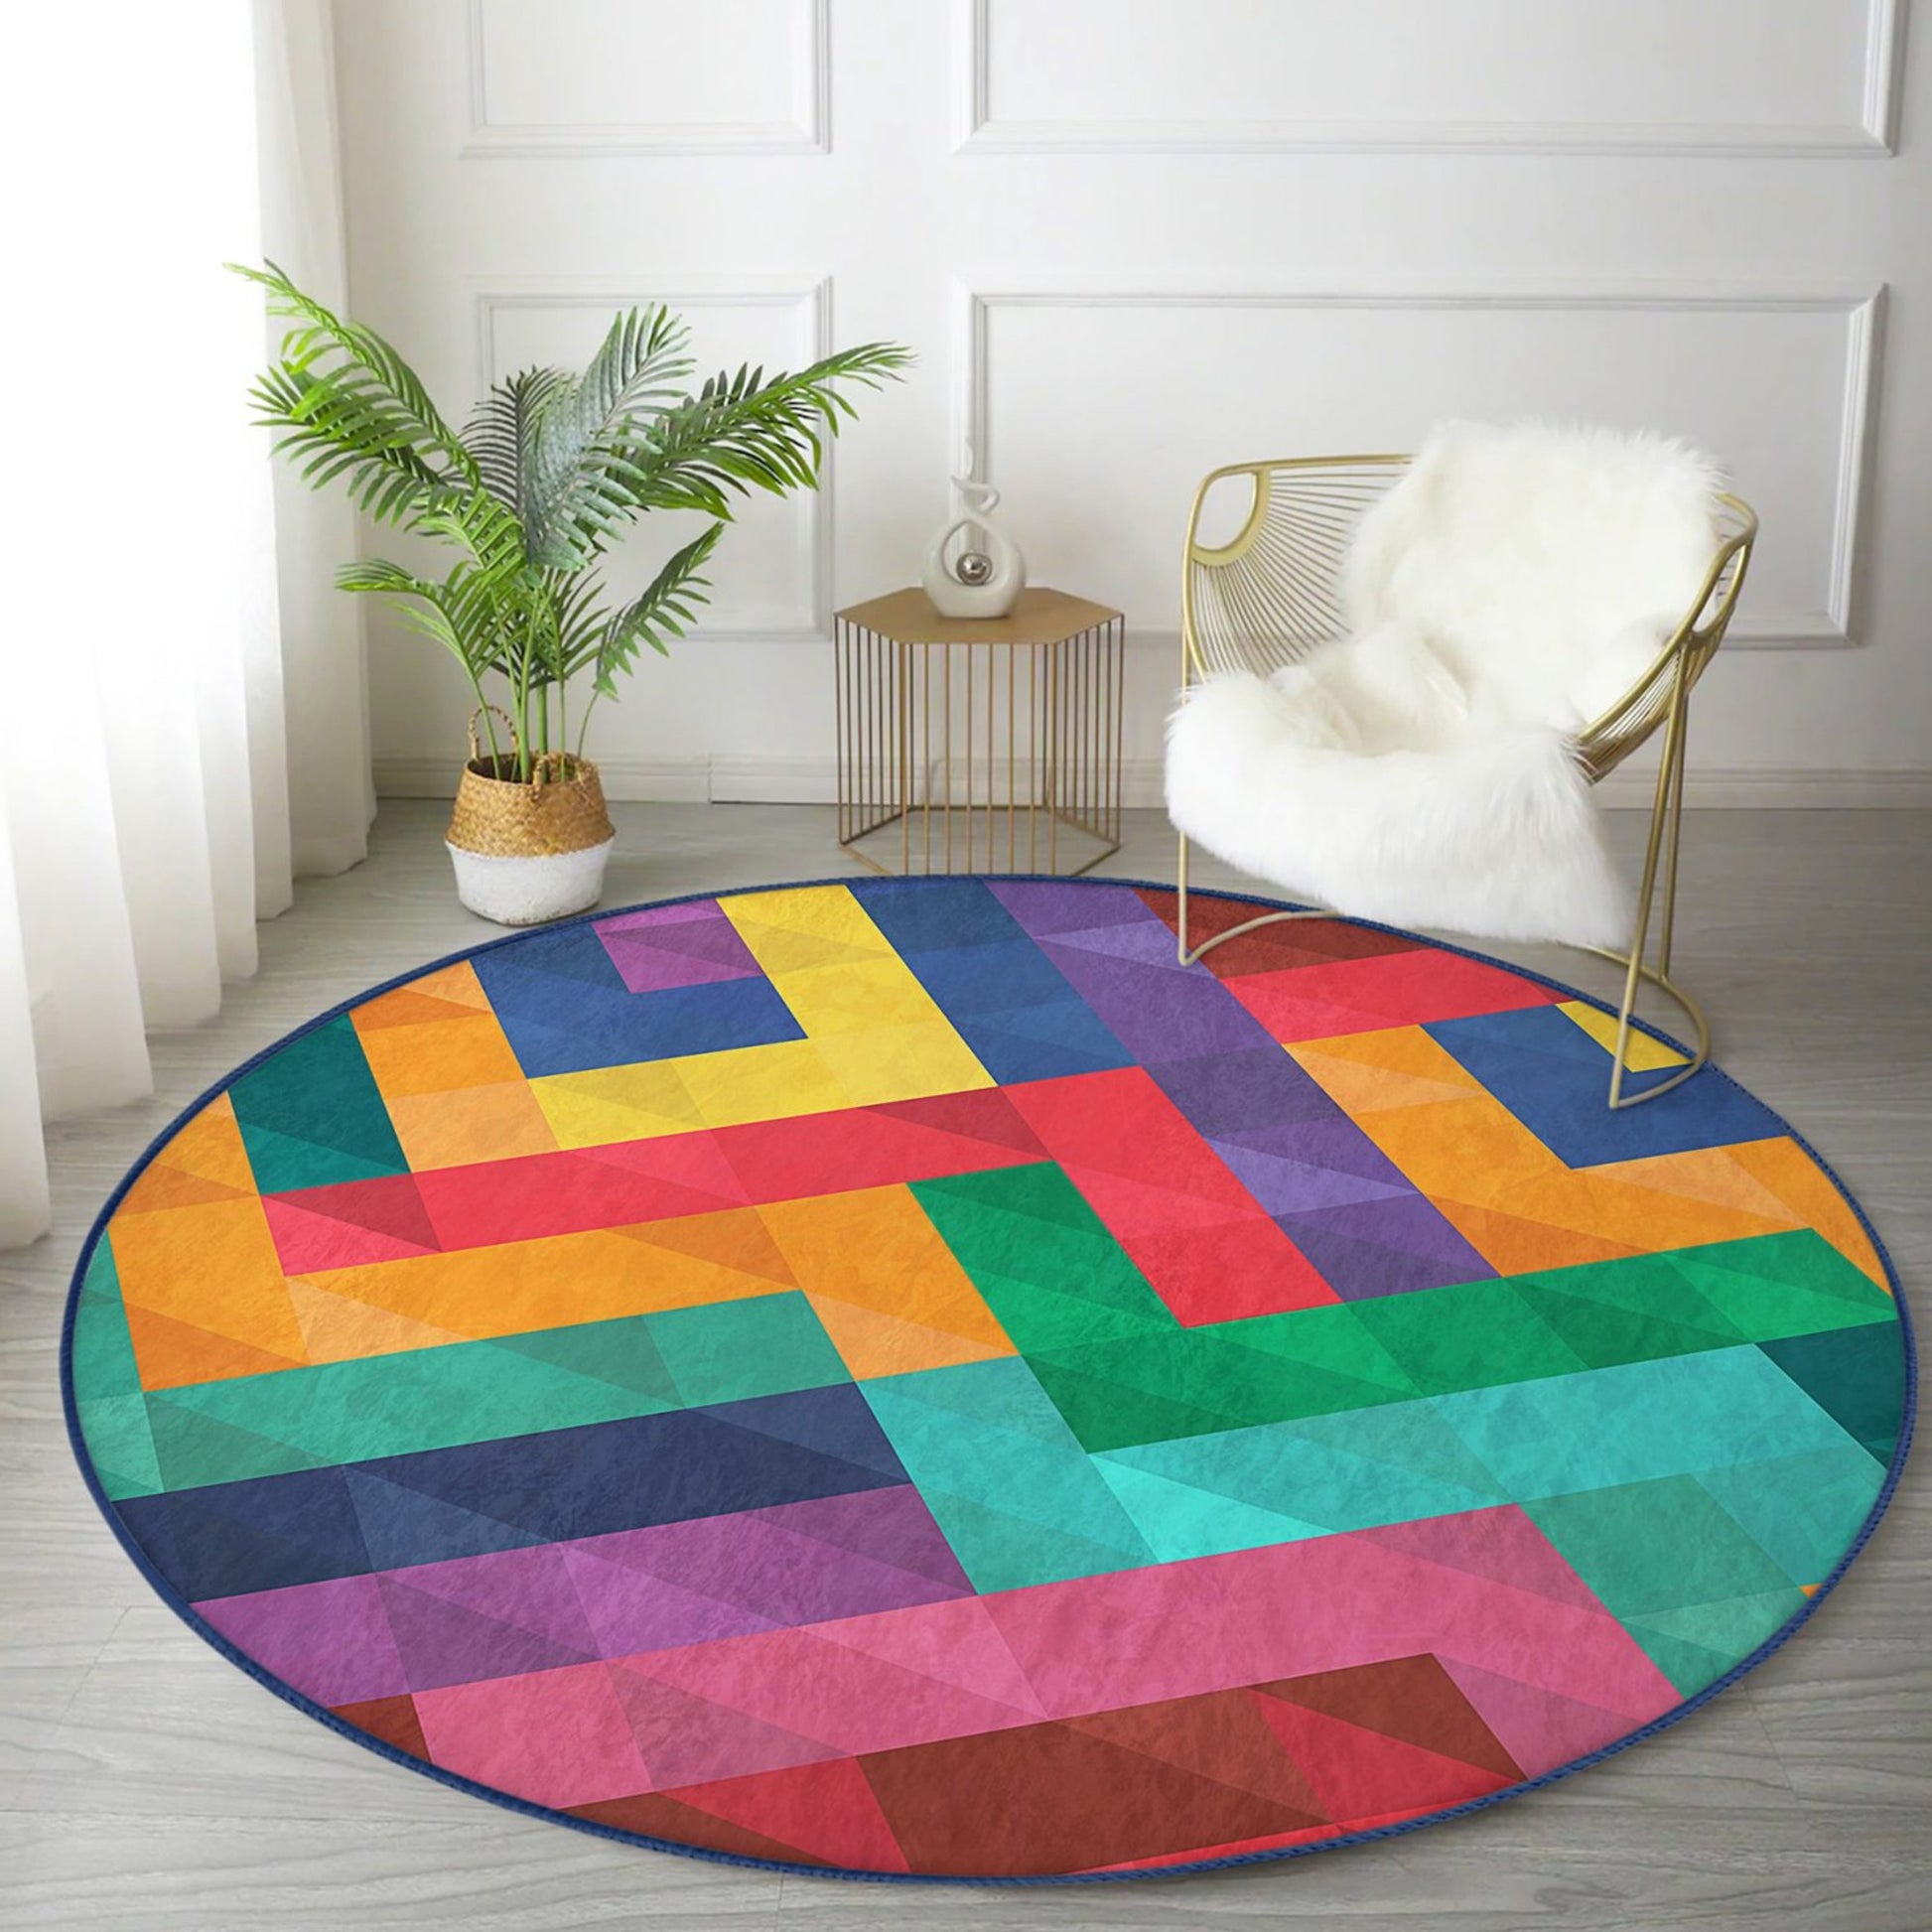 Washable Rug with Rainbow Colors Pattern - Easy Maintenance